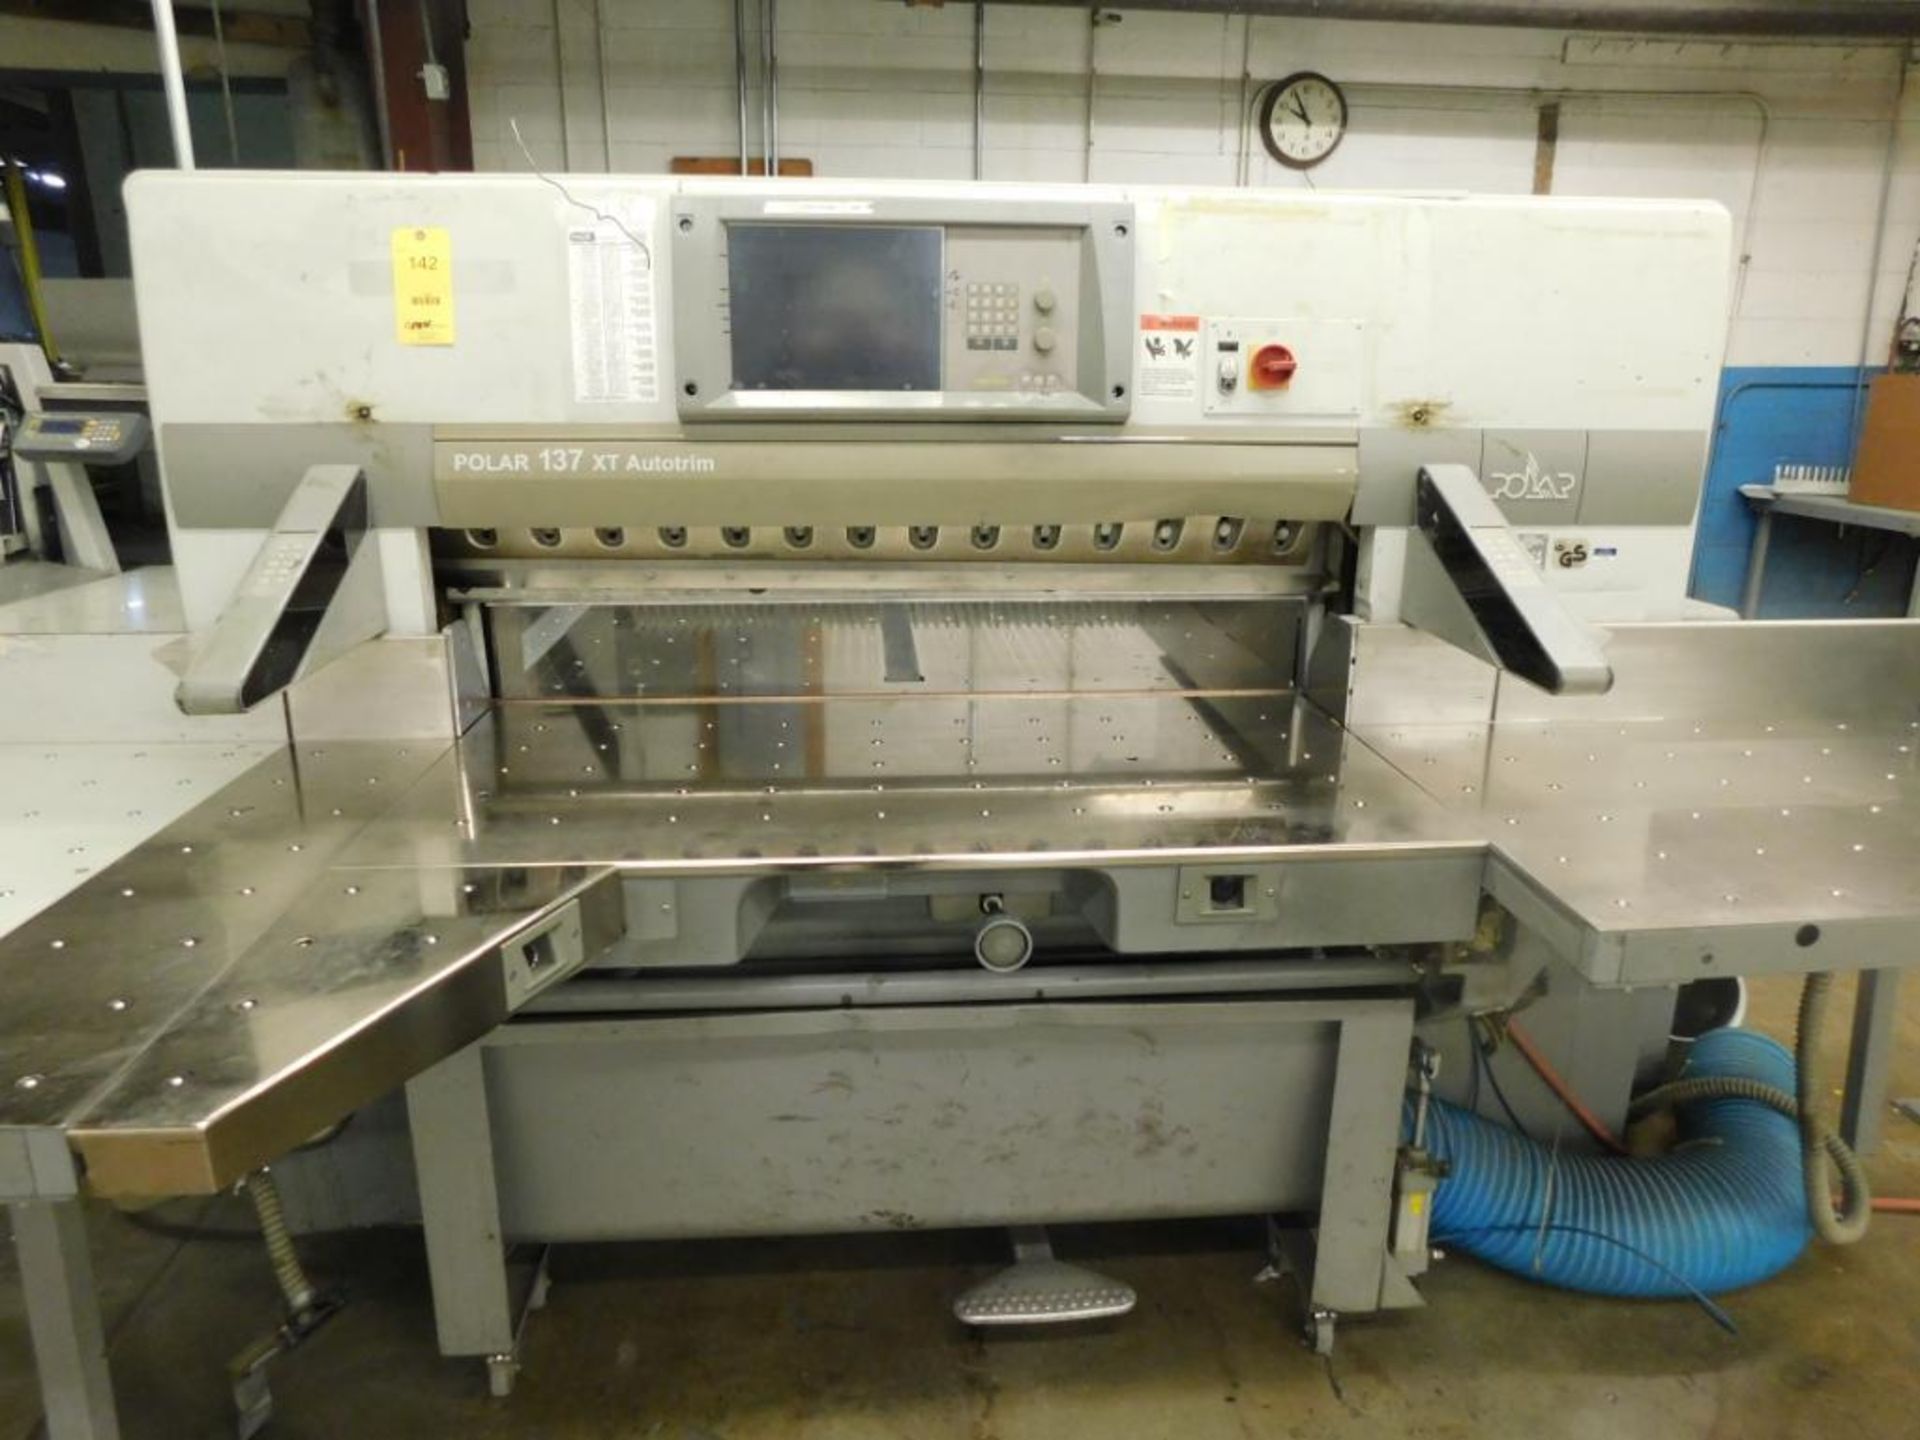 LOT: 2005 Polar 137XT-AT 54 in. Paper Cutter System, S/N 7541321, with Auto Trim, Rear Loading Table - Image 2 of 3